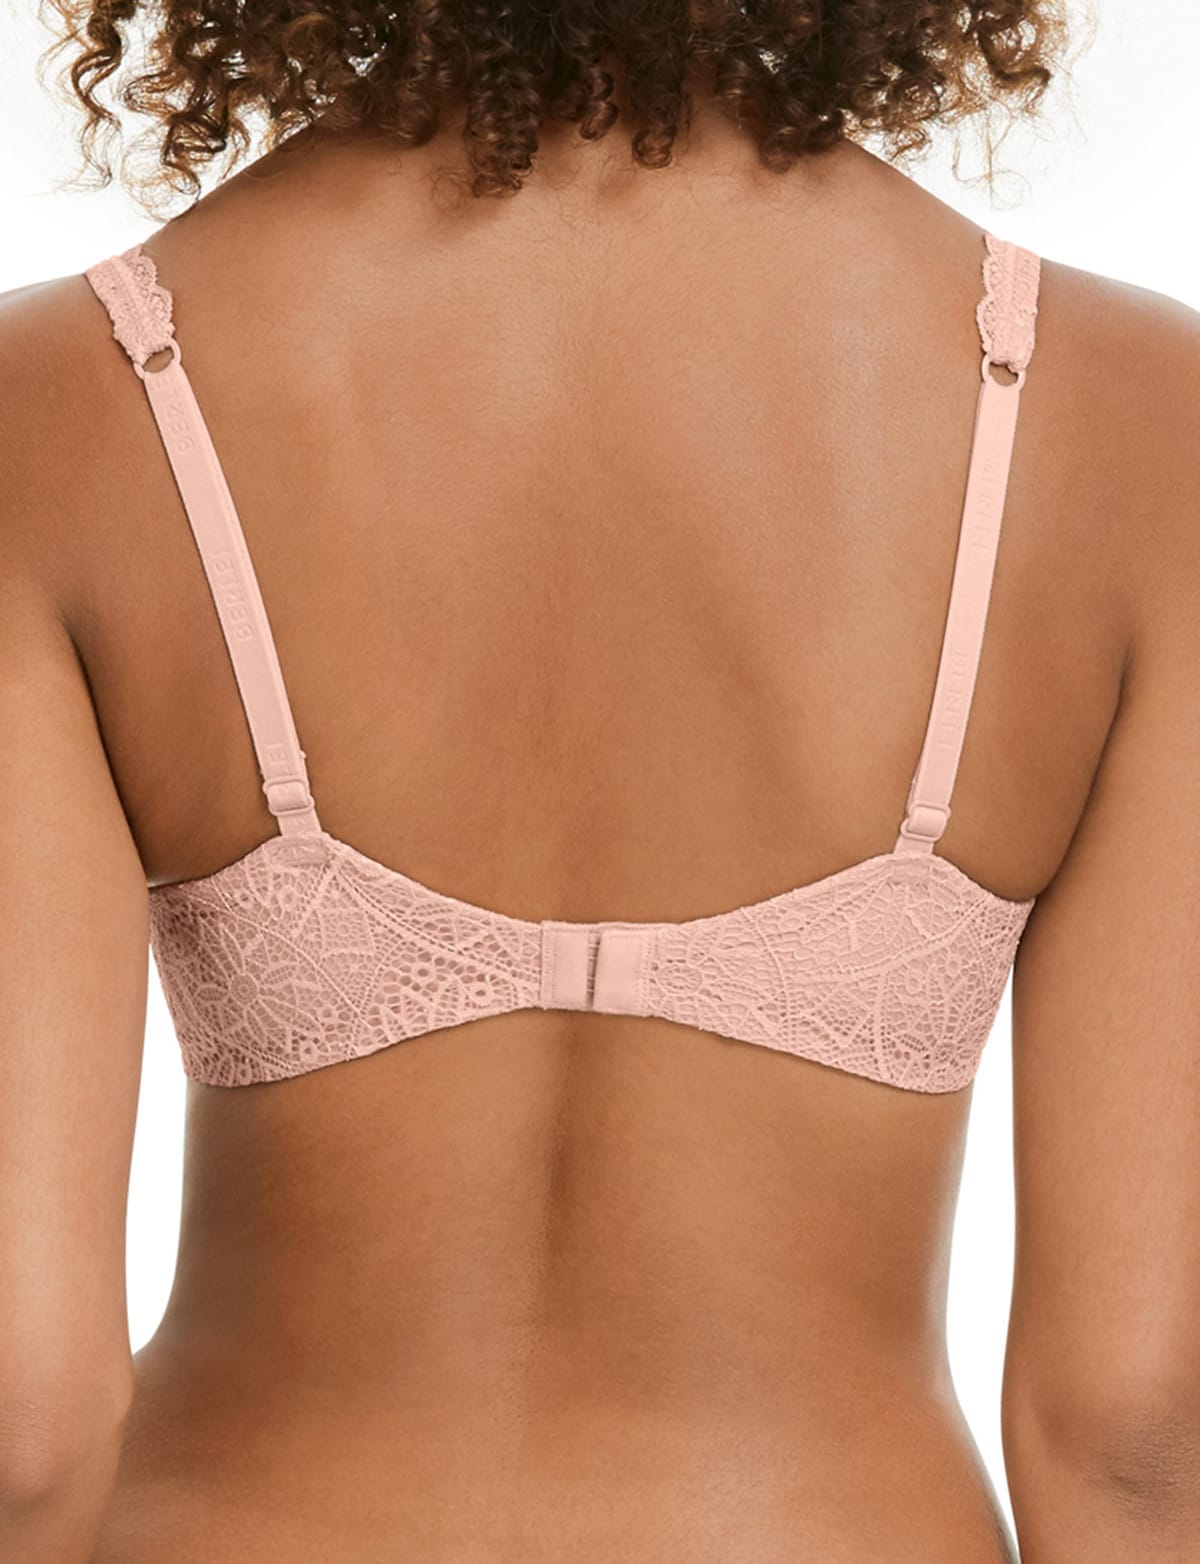 Berlei Barely There Lace T-Shirt Bra, Nude, A-E - Bras